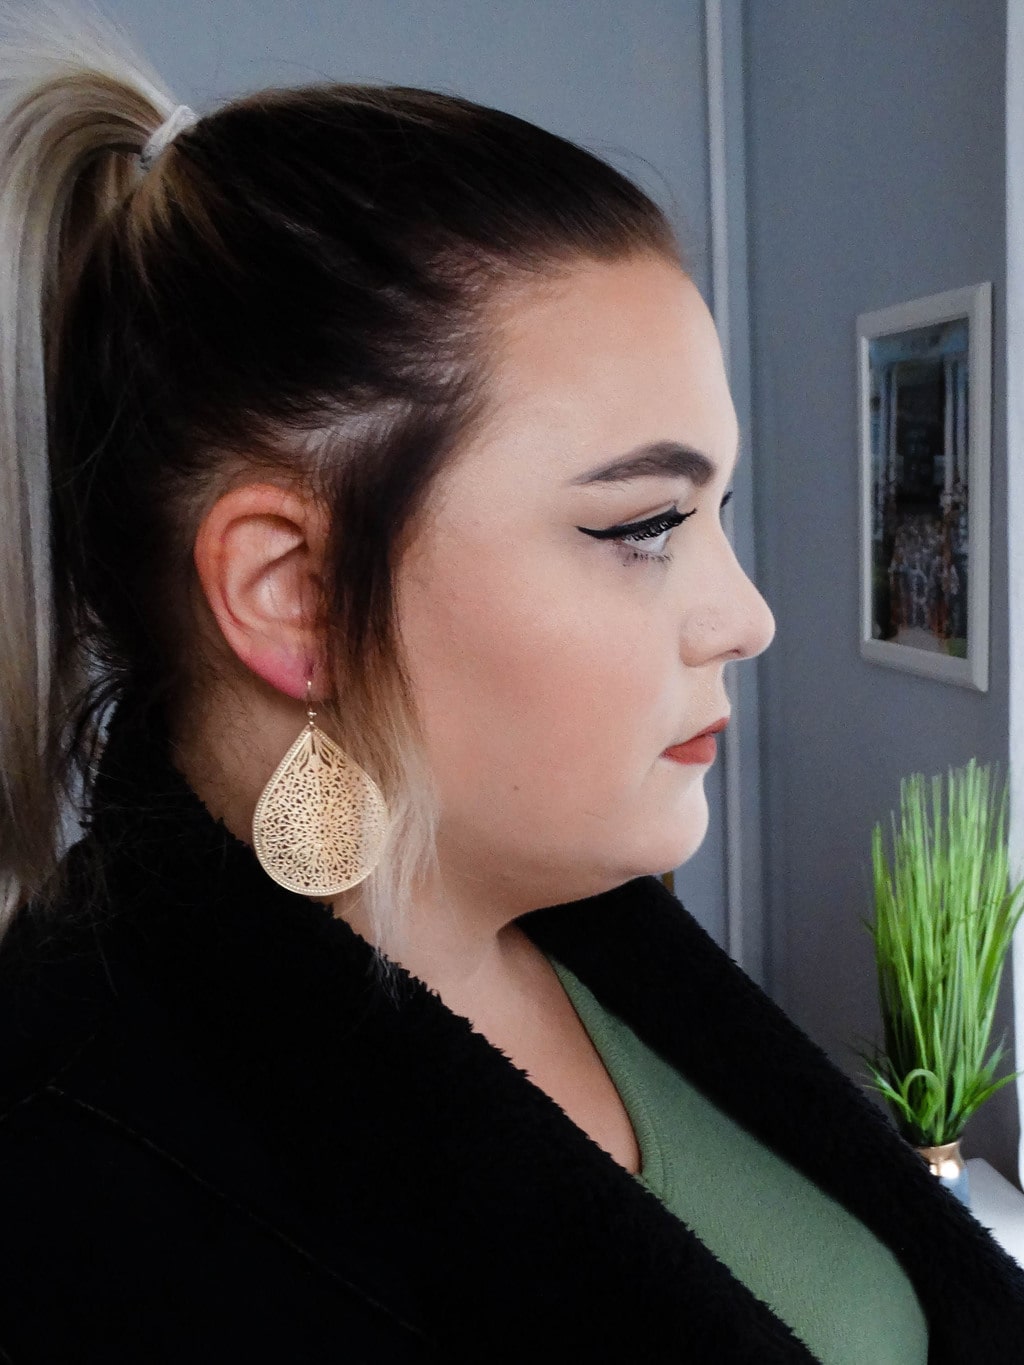 A high ponytail shows off this student'sintricate gold teardrop earrings.